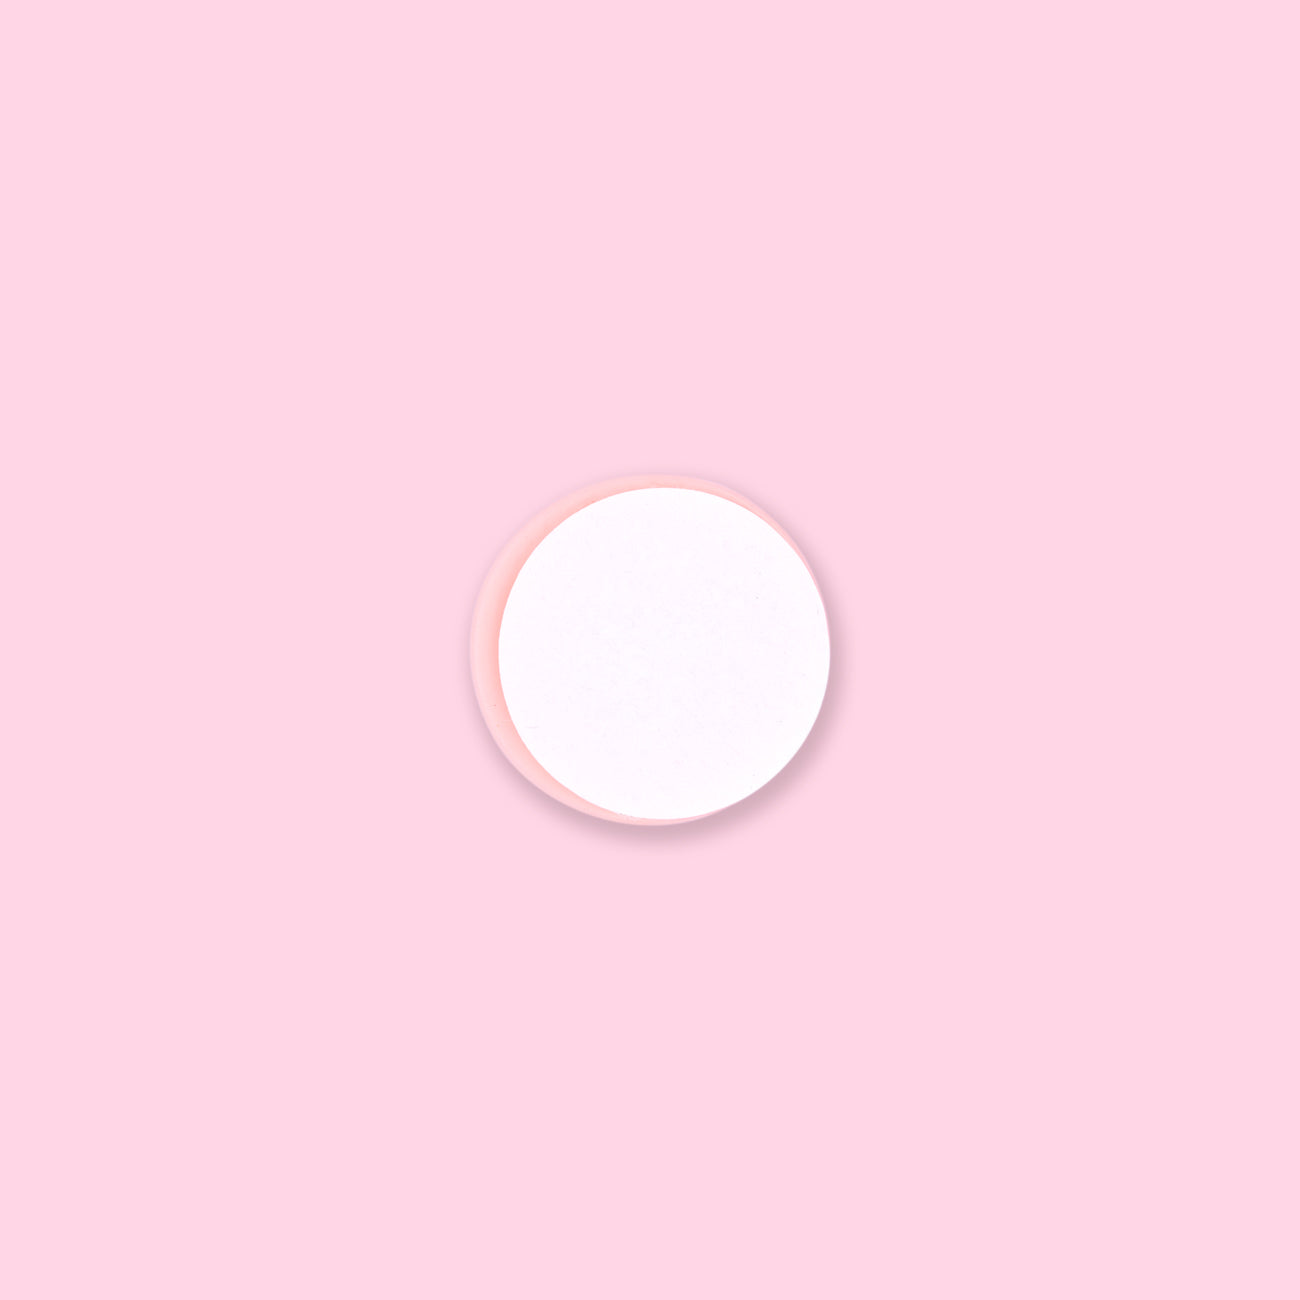 Pastel Mint Green, Pink and Black Paint Dot Drops White Background Canvas  Print by 5mm Paper